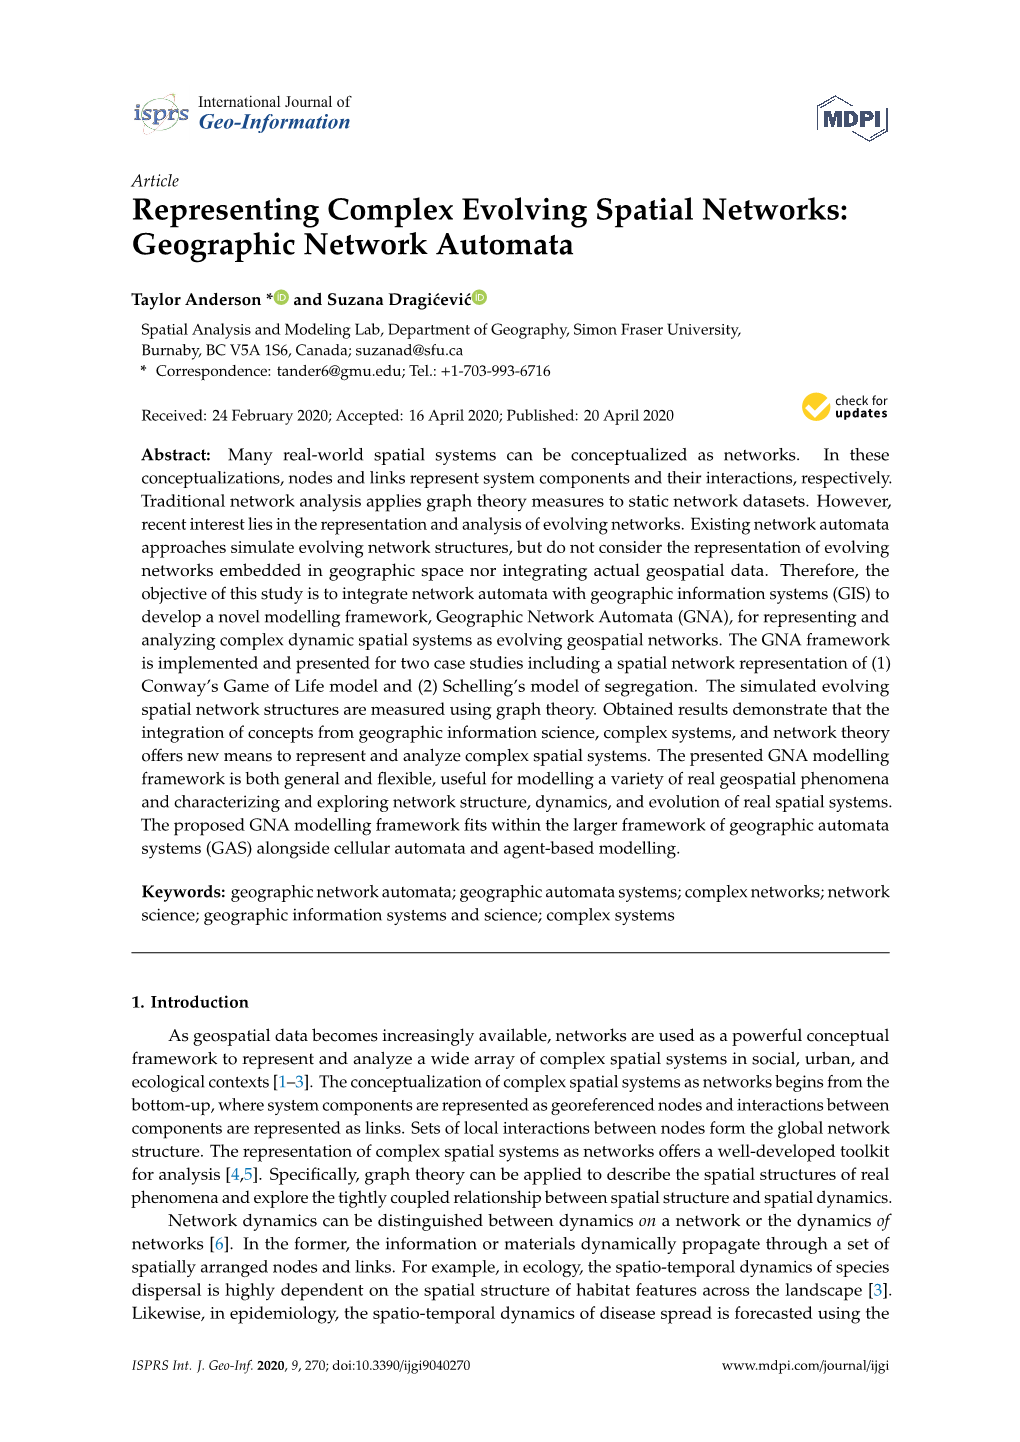 Representing Complex Evolving Spatial Networks: Geographic Network Automata